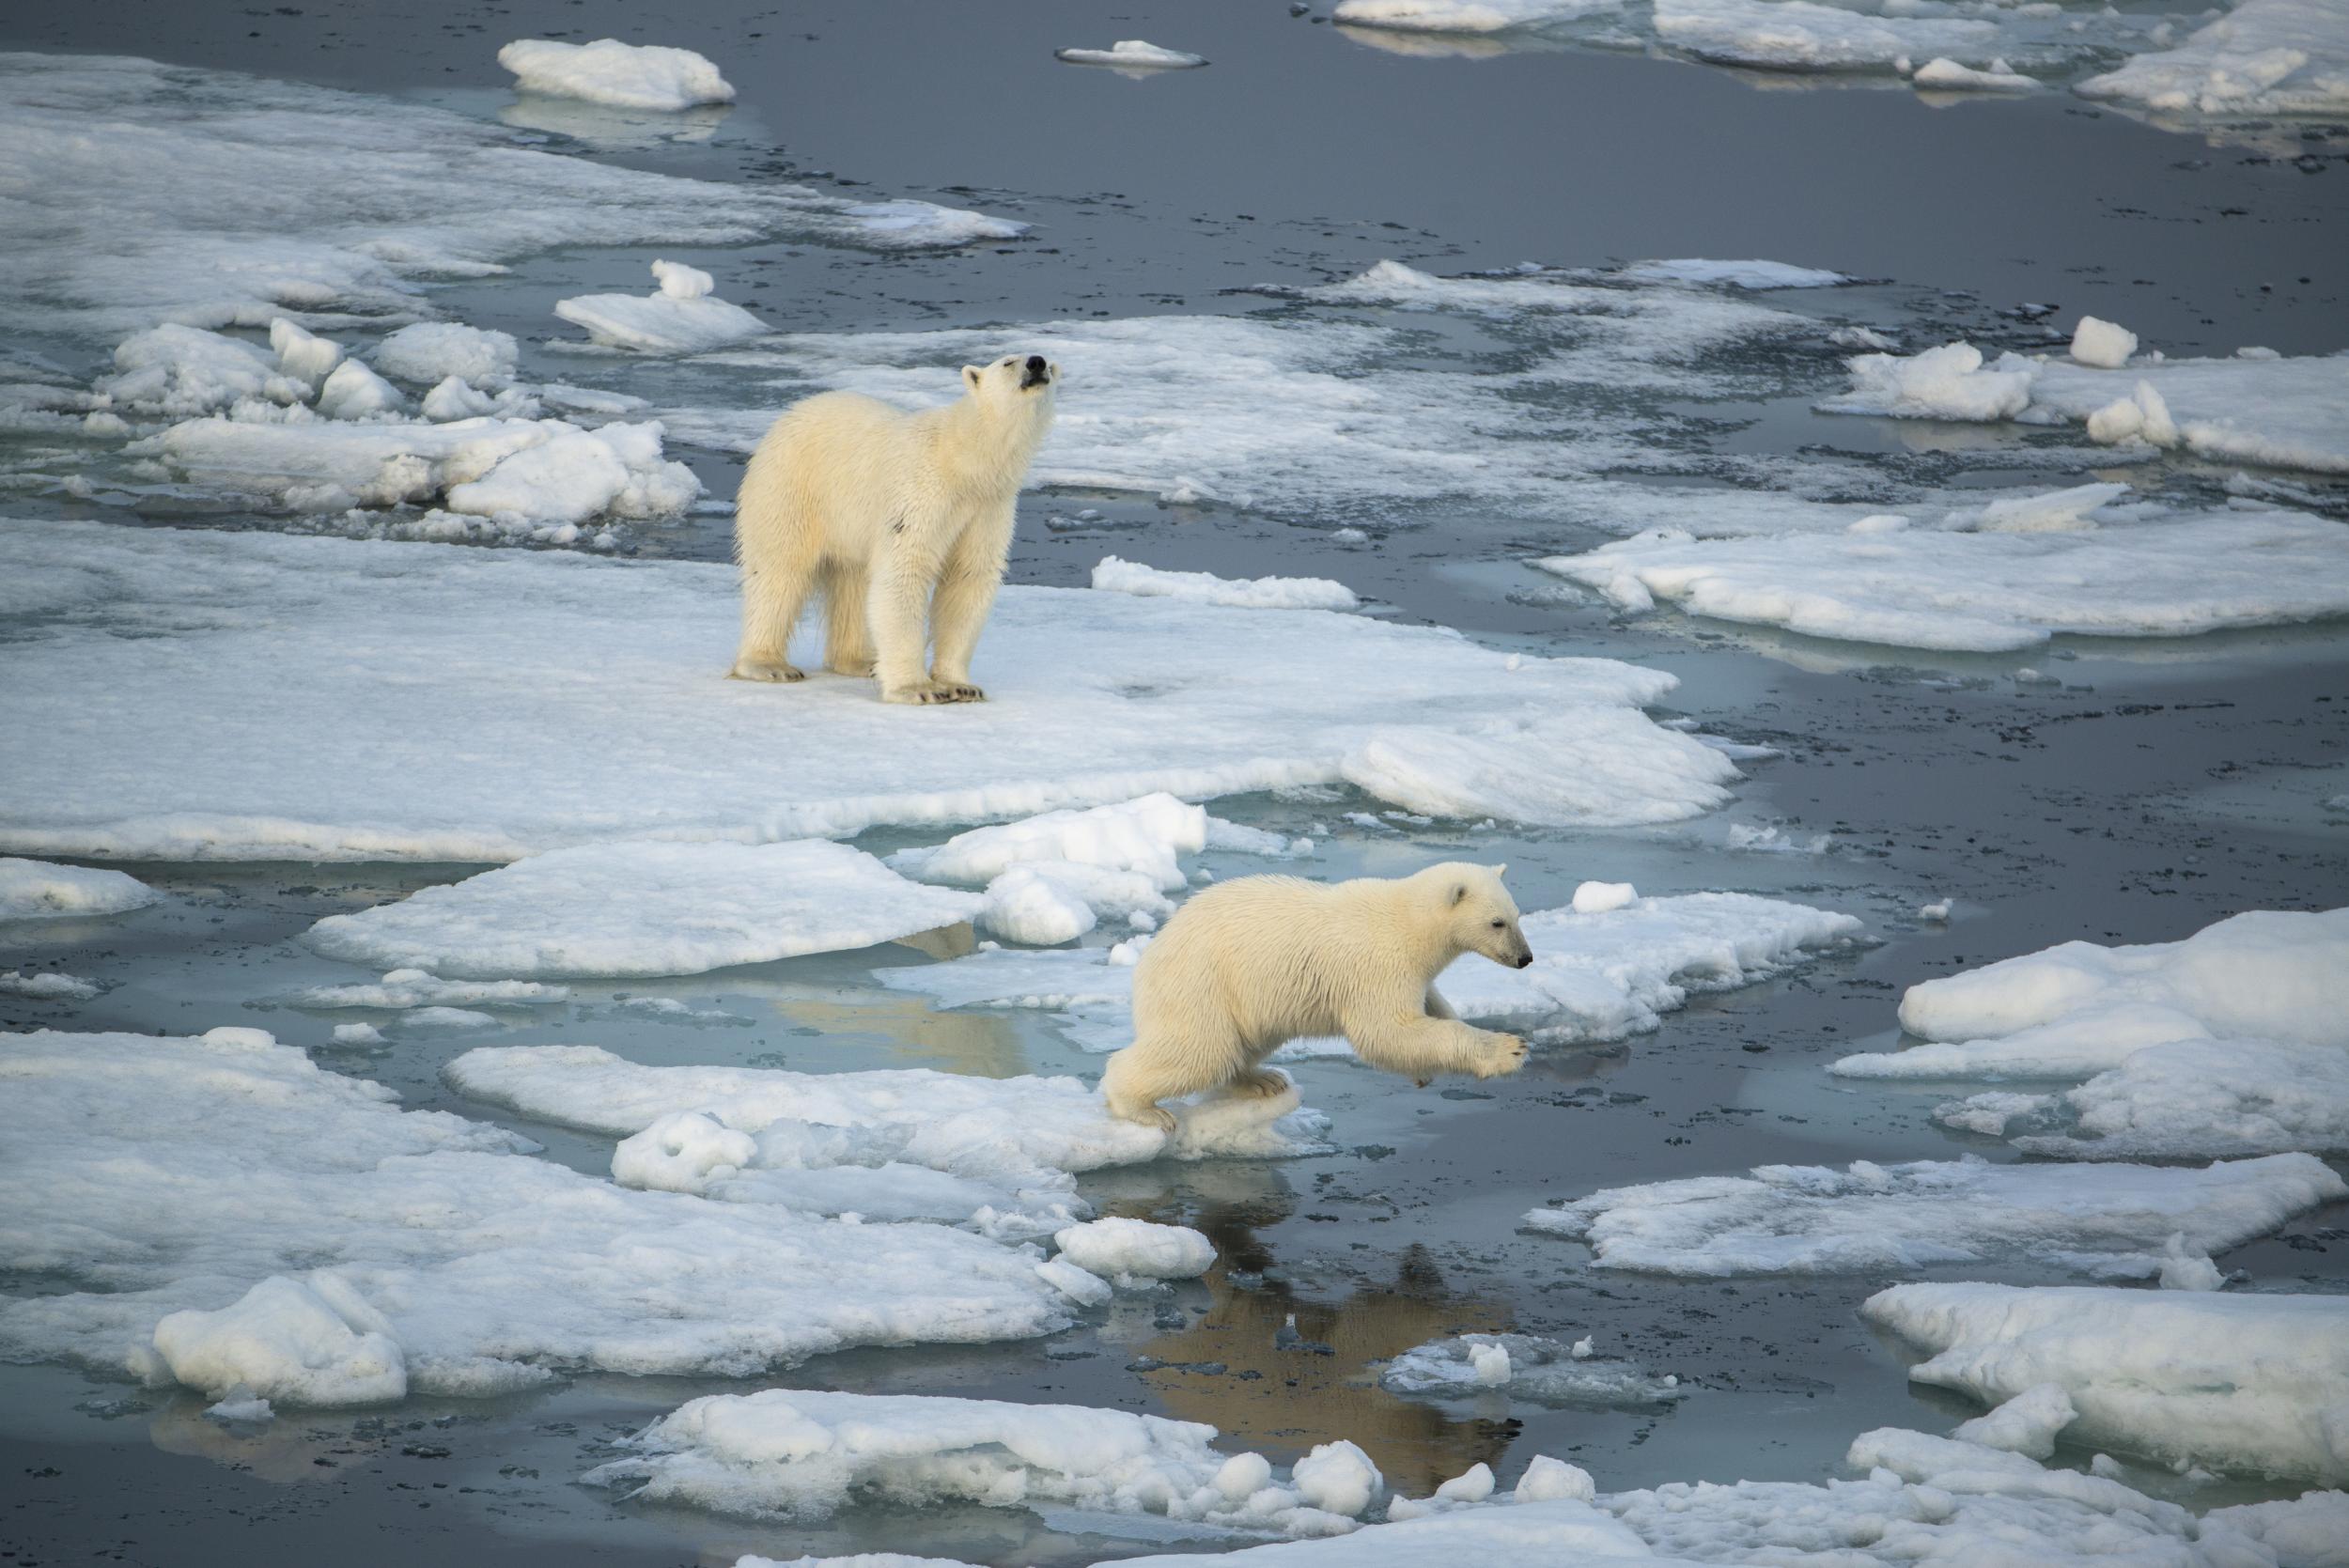 Passengers on a voyage to the Arctic will often spot polar bears from their boat